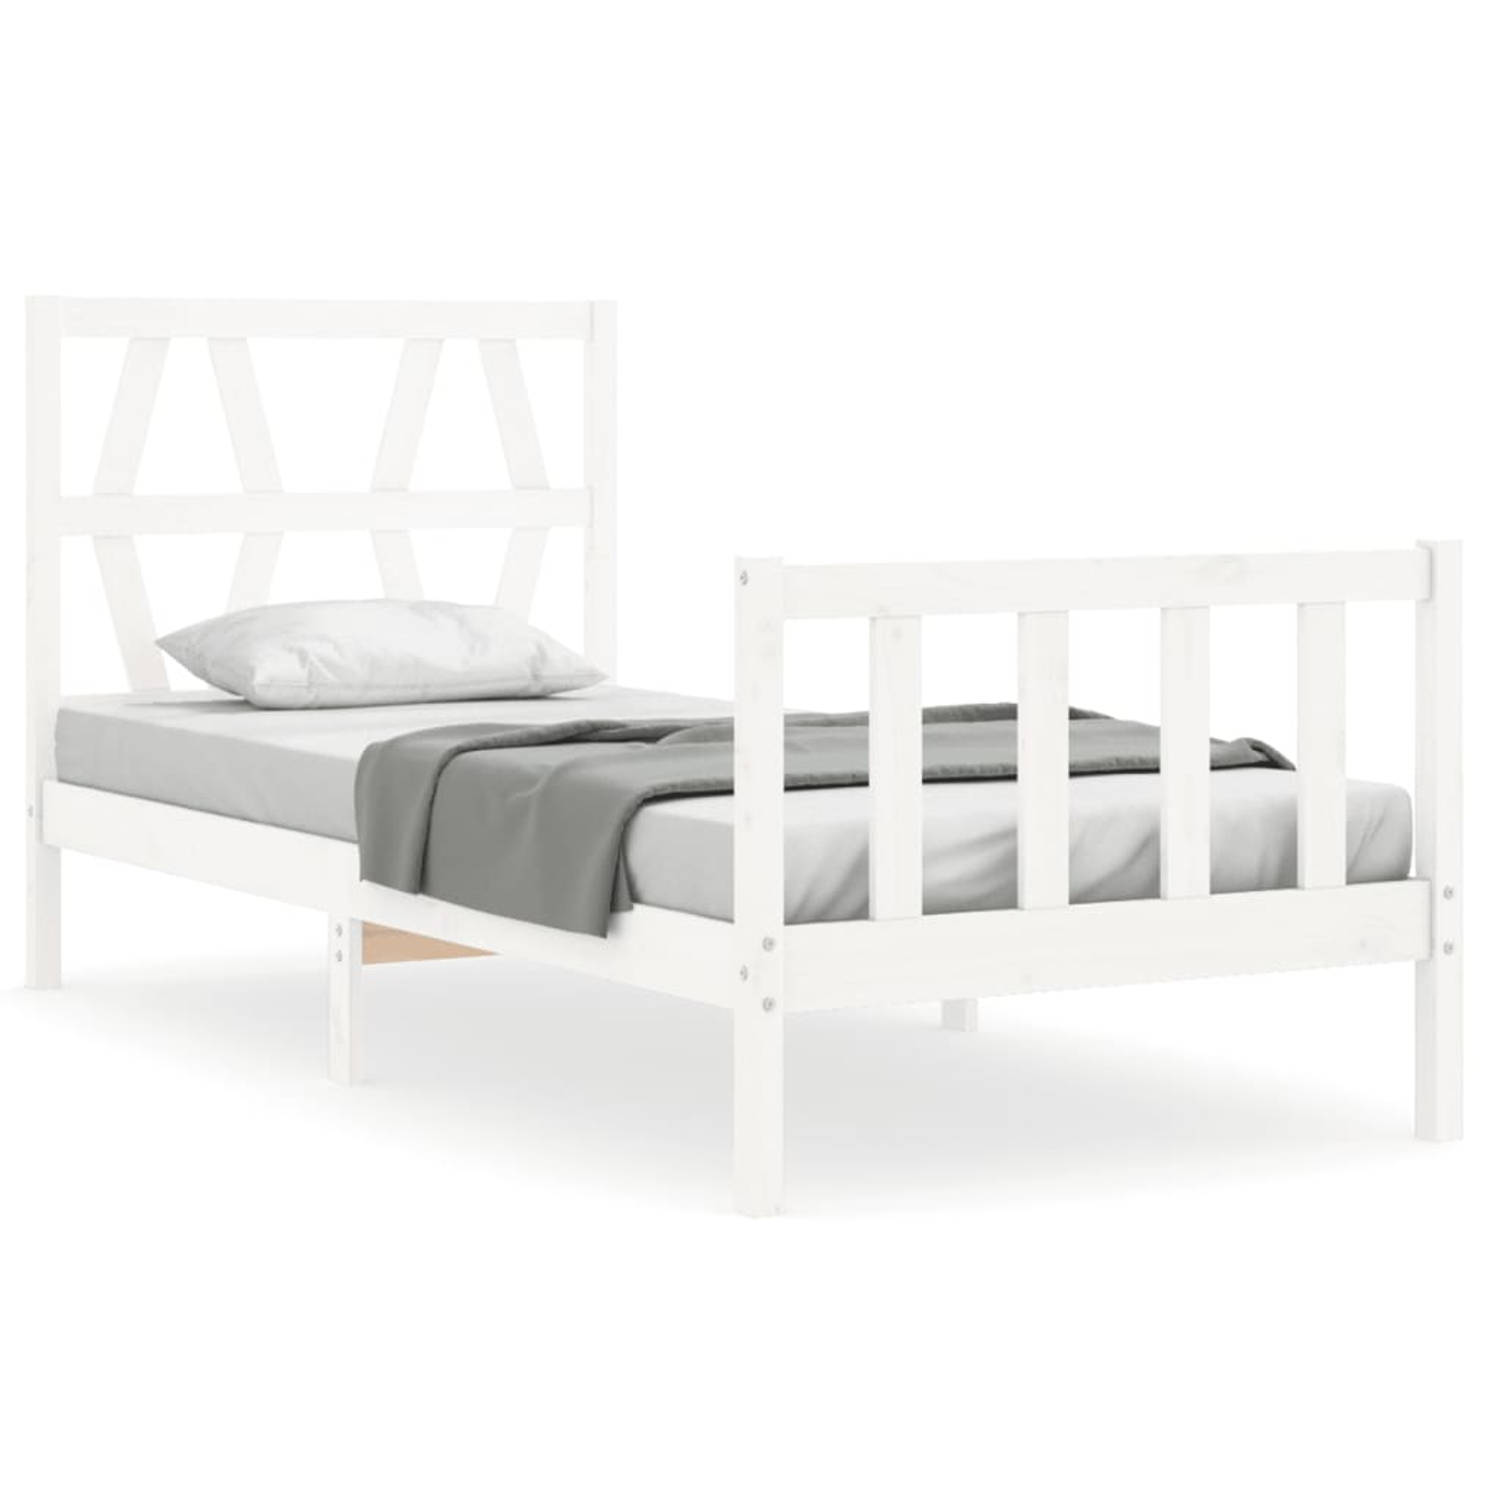 The Living Store Bed Grenenhout - 205.5 x 105.5 x 100 cm - Wit - 100 x 200 cm